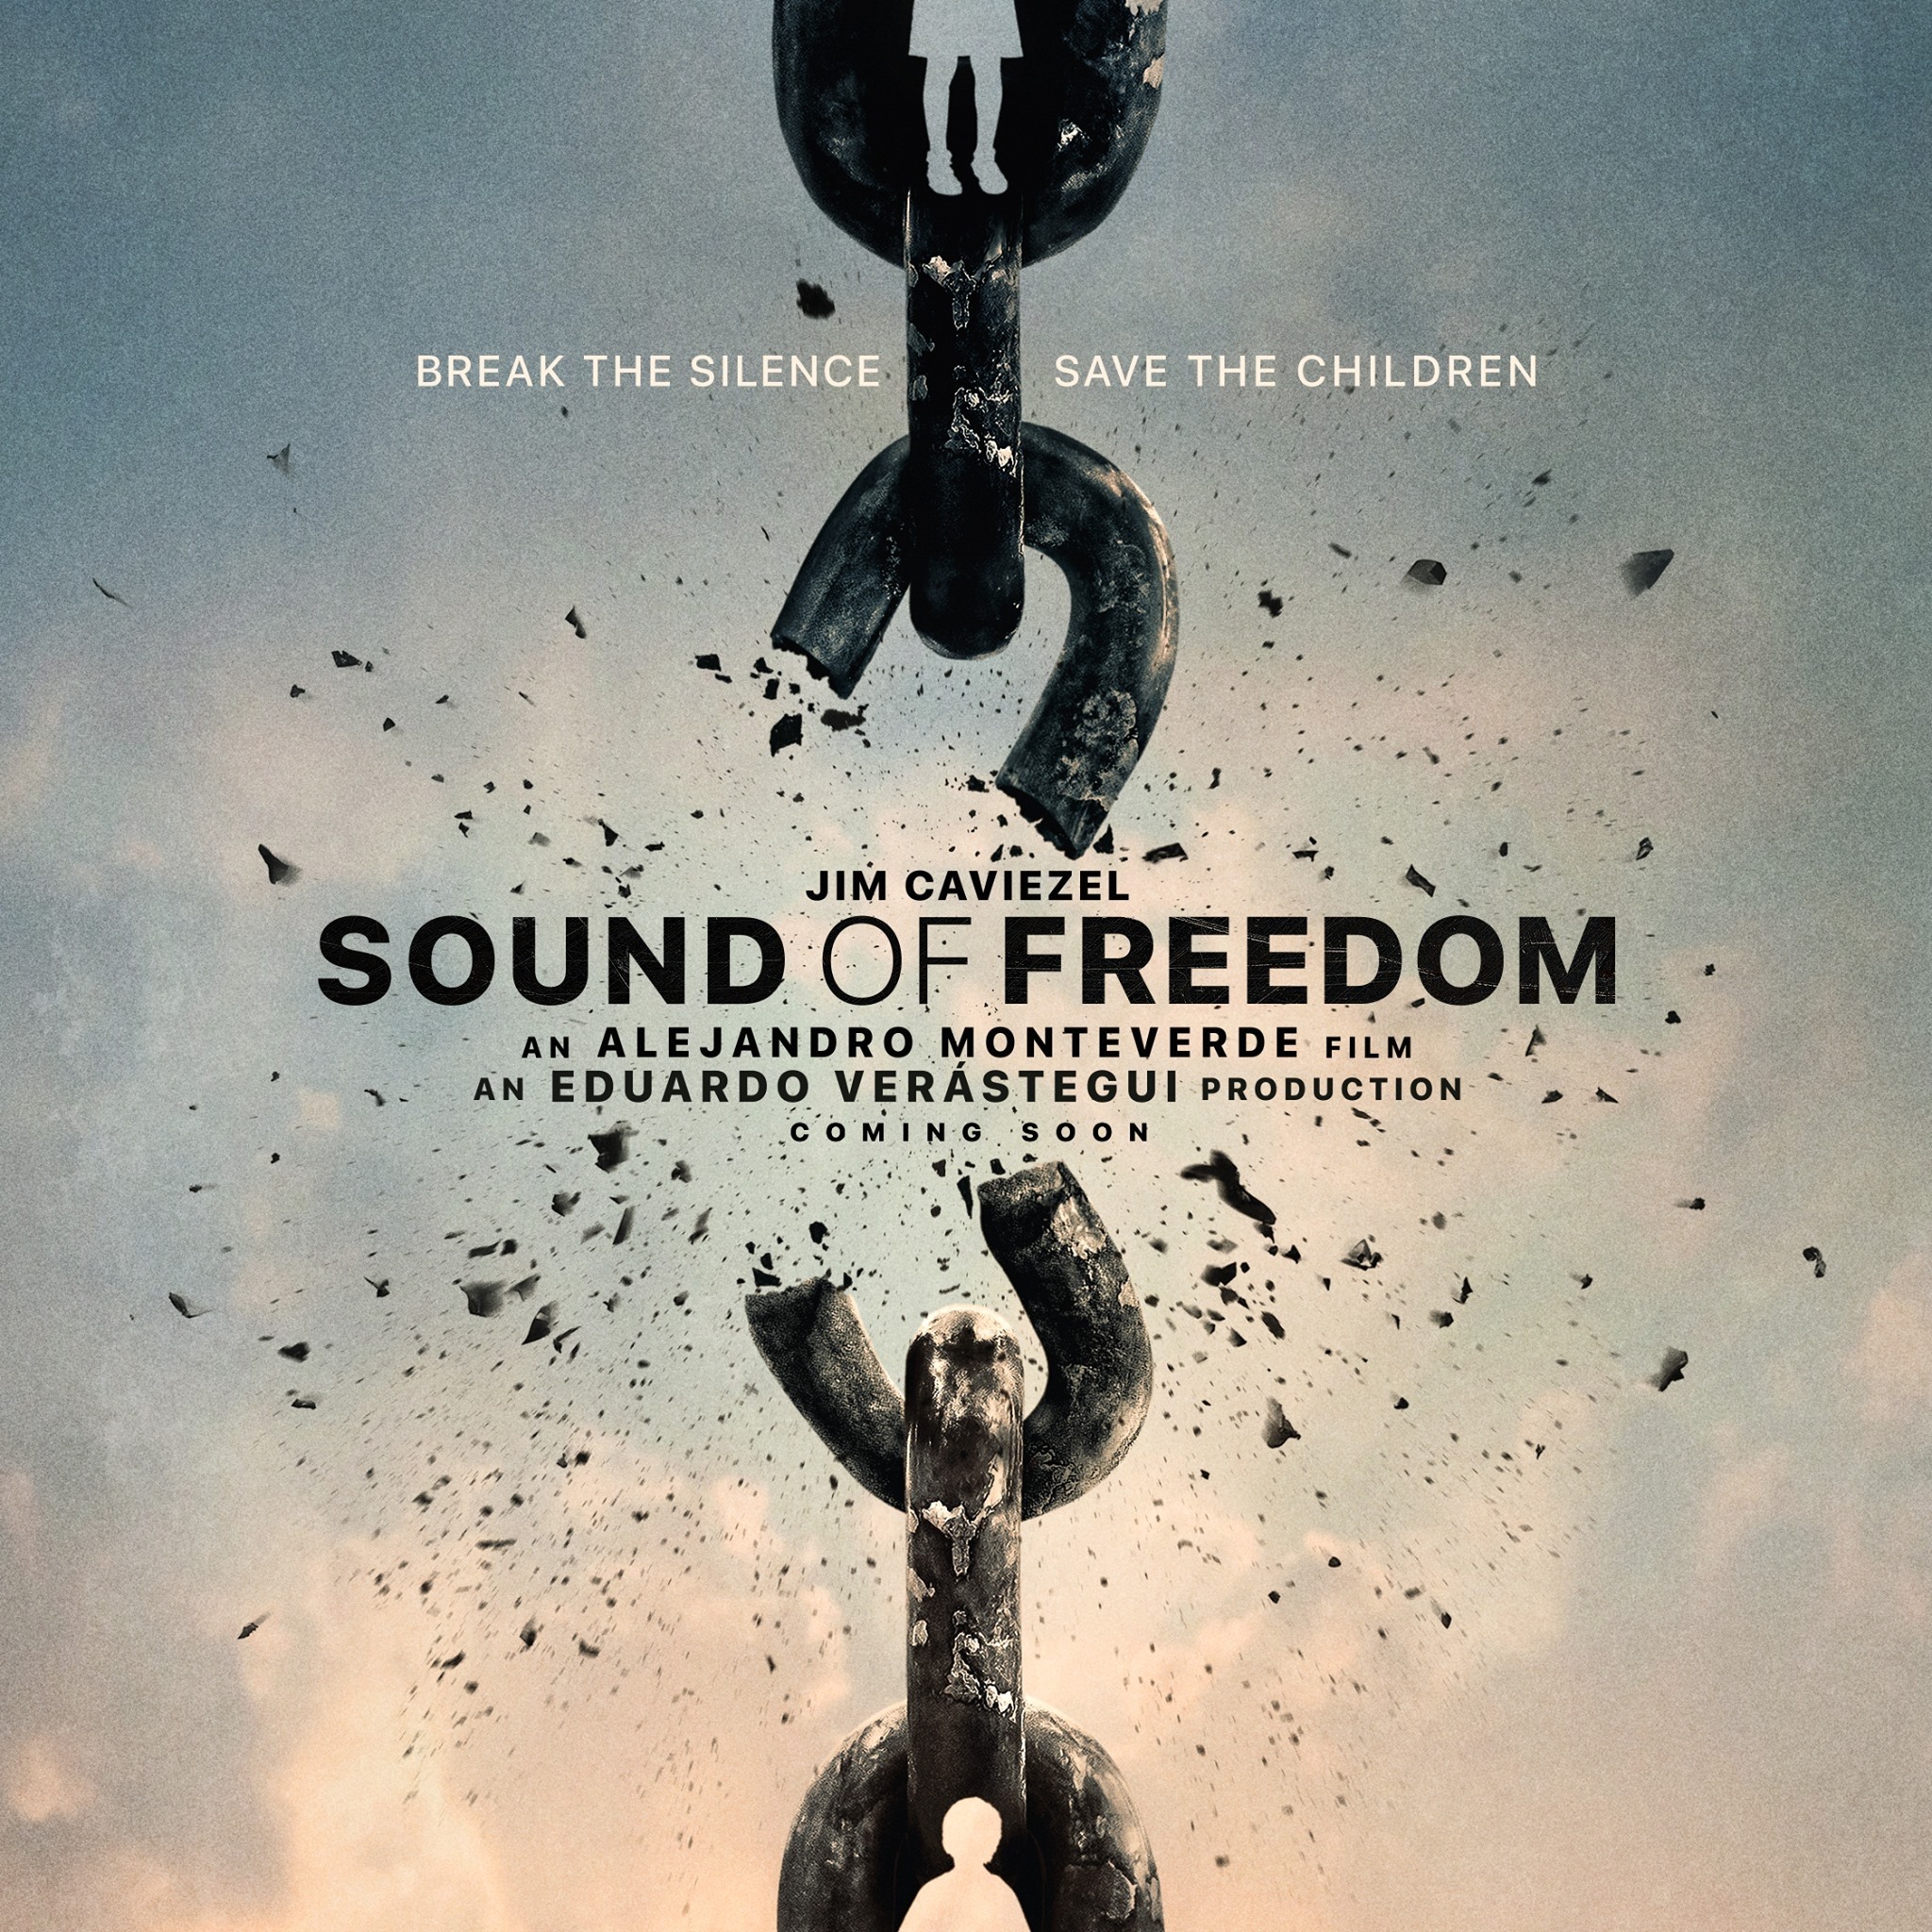 AntiHuman Trafficking 'Sound Of Freedom' Is 3 At Theaters, Beat